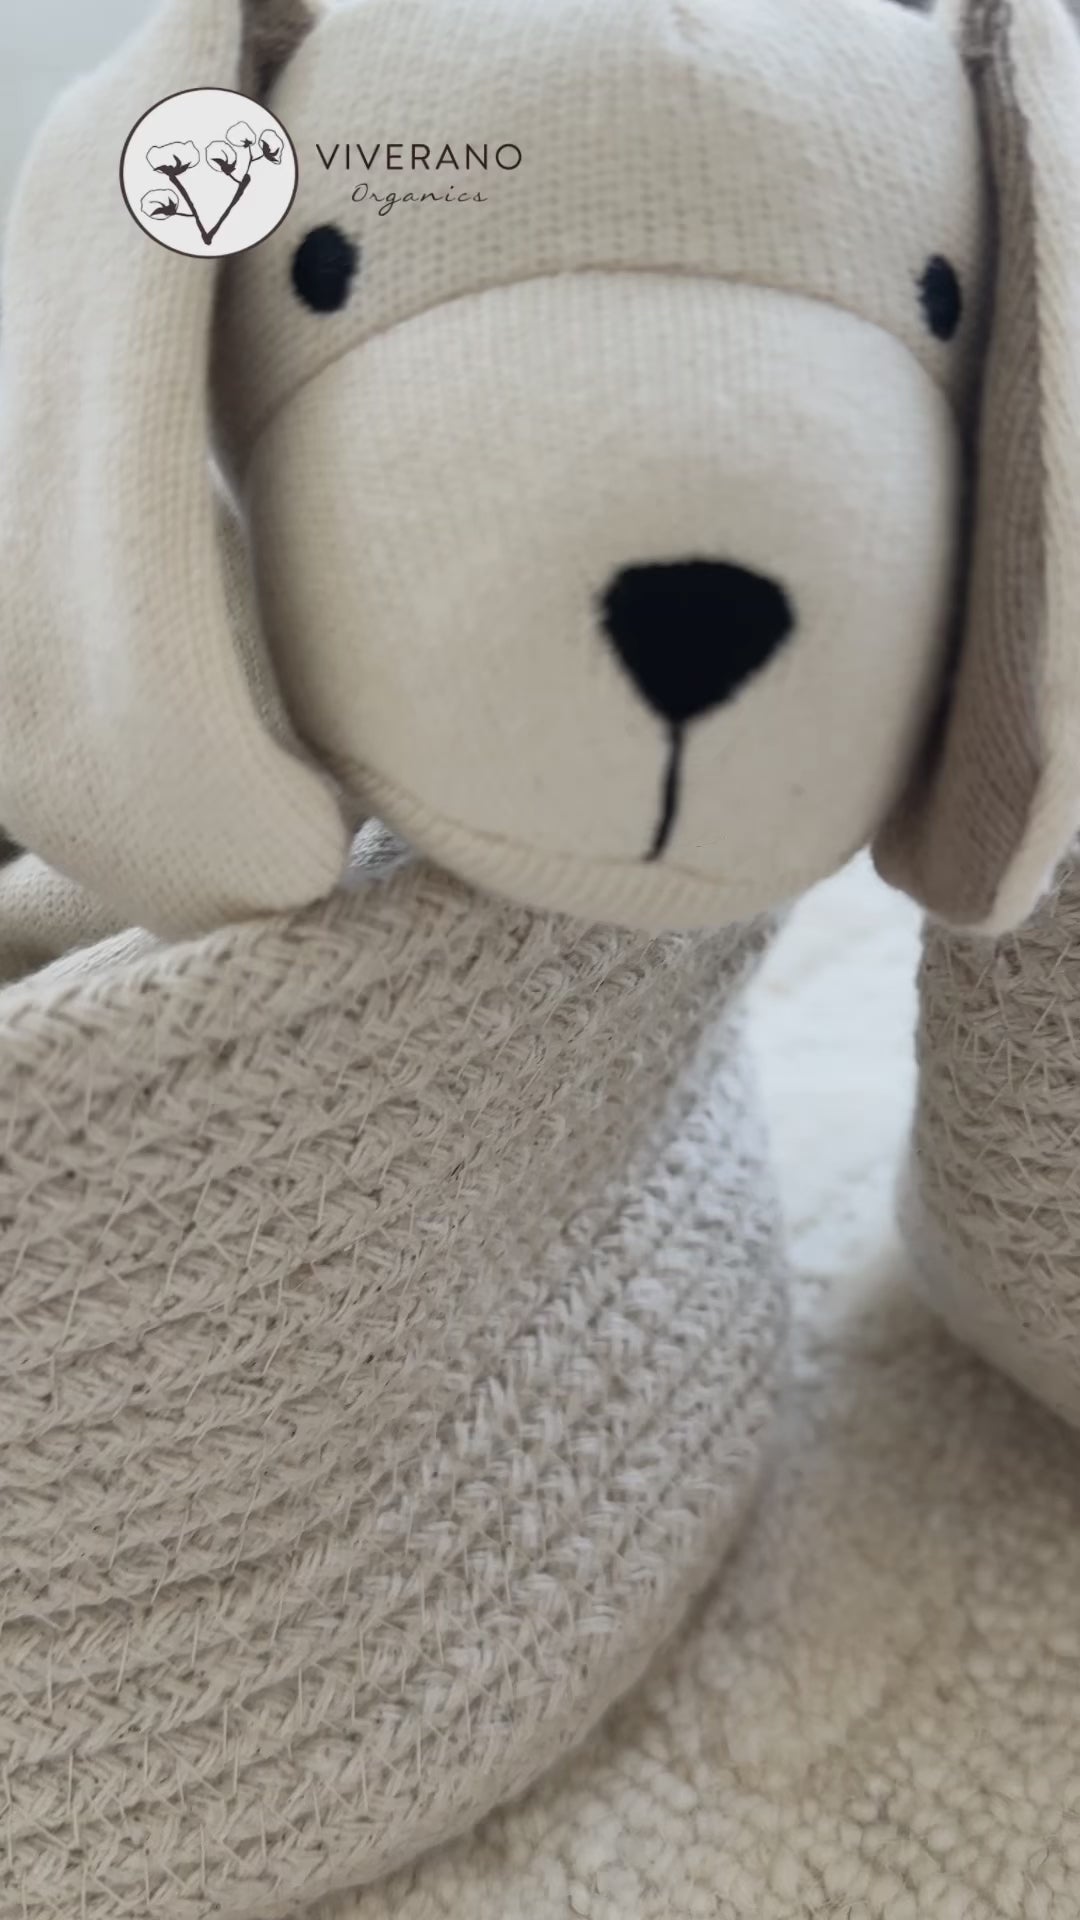 Snuggle up to sustainable cuteness! Introducing our adorable organic cotton puppy dog baby loveys, crafted with love in India. Double the charm with two-tone perfection.